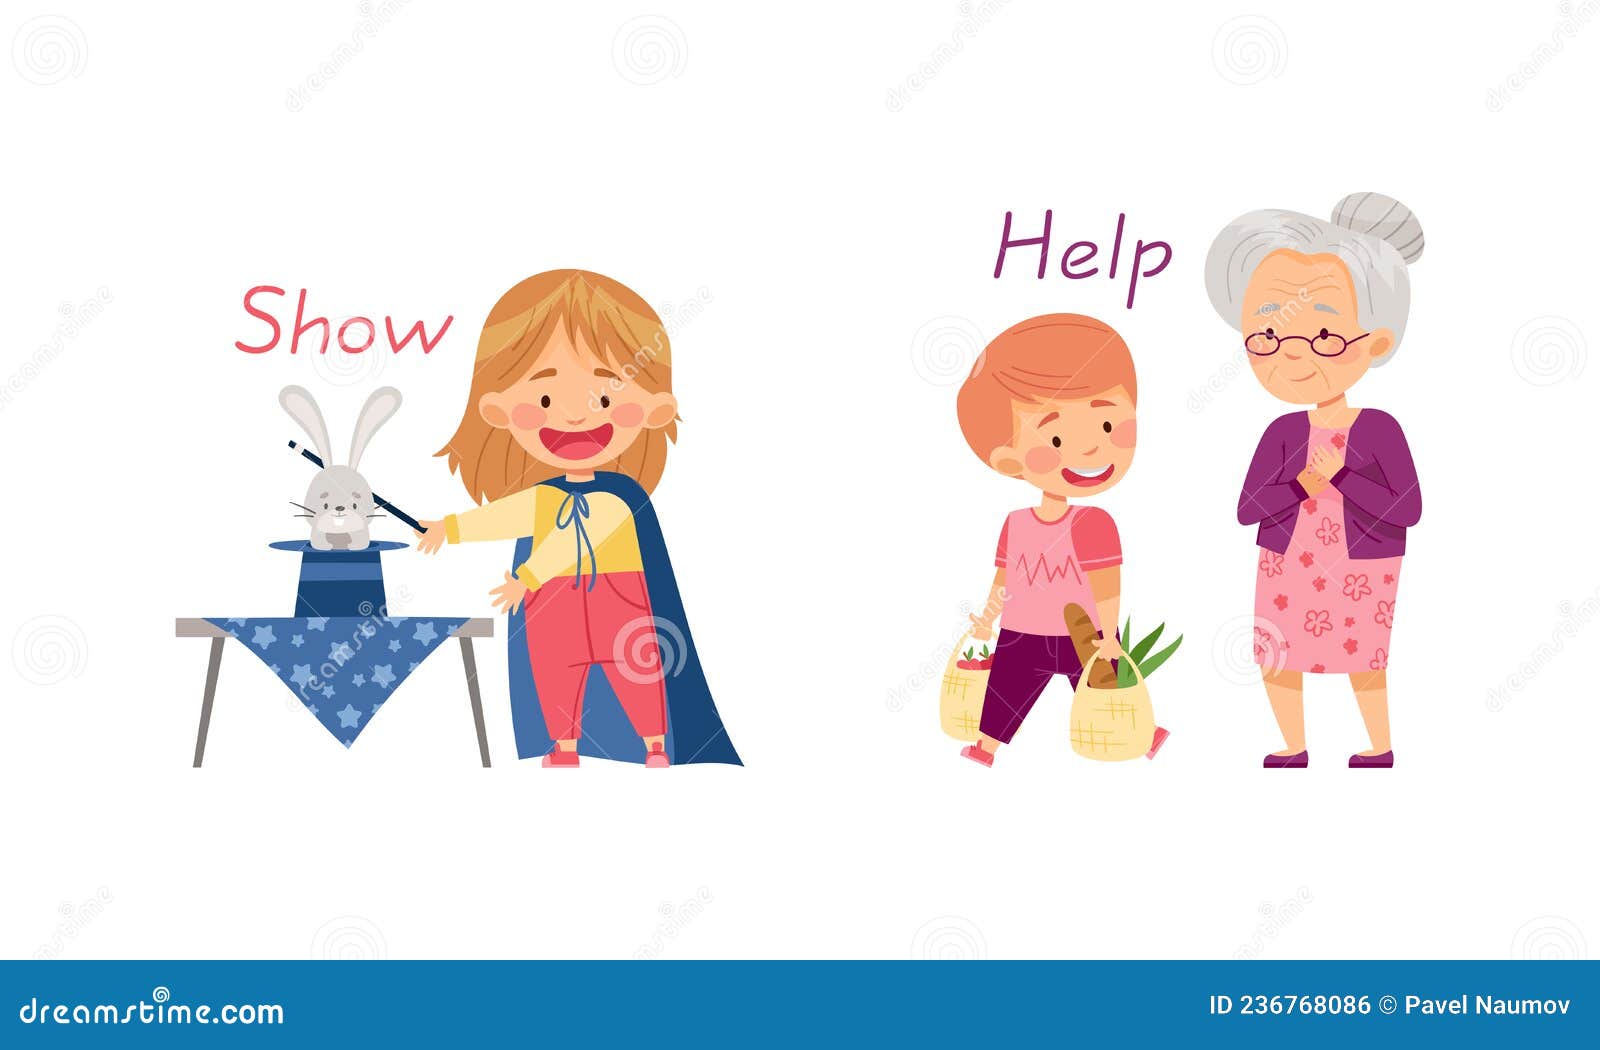 Show and Help English Action Verbs for Kids Education Set. Children Doing  daily Routine Activities Vector Illustration Stock Vector - Illustration of  character, show: 236768086